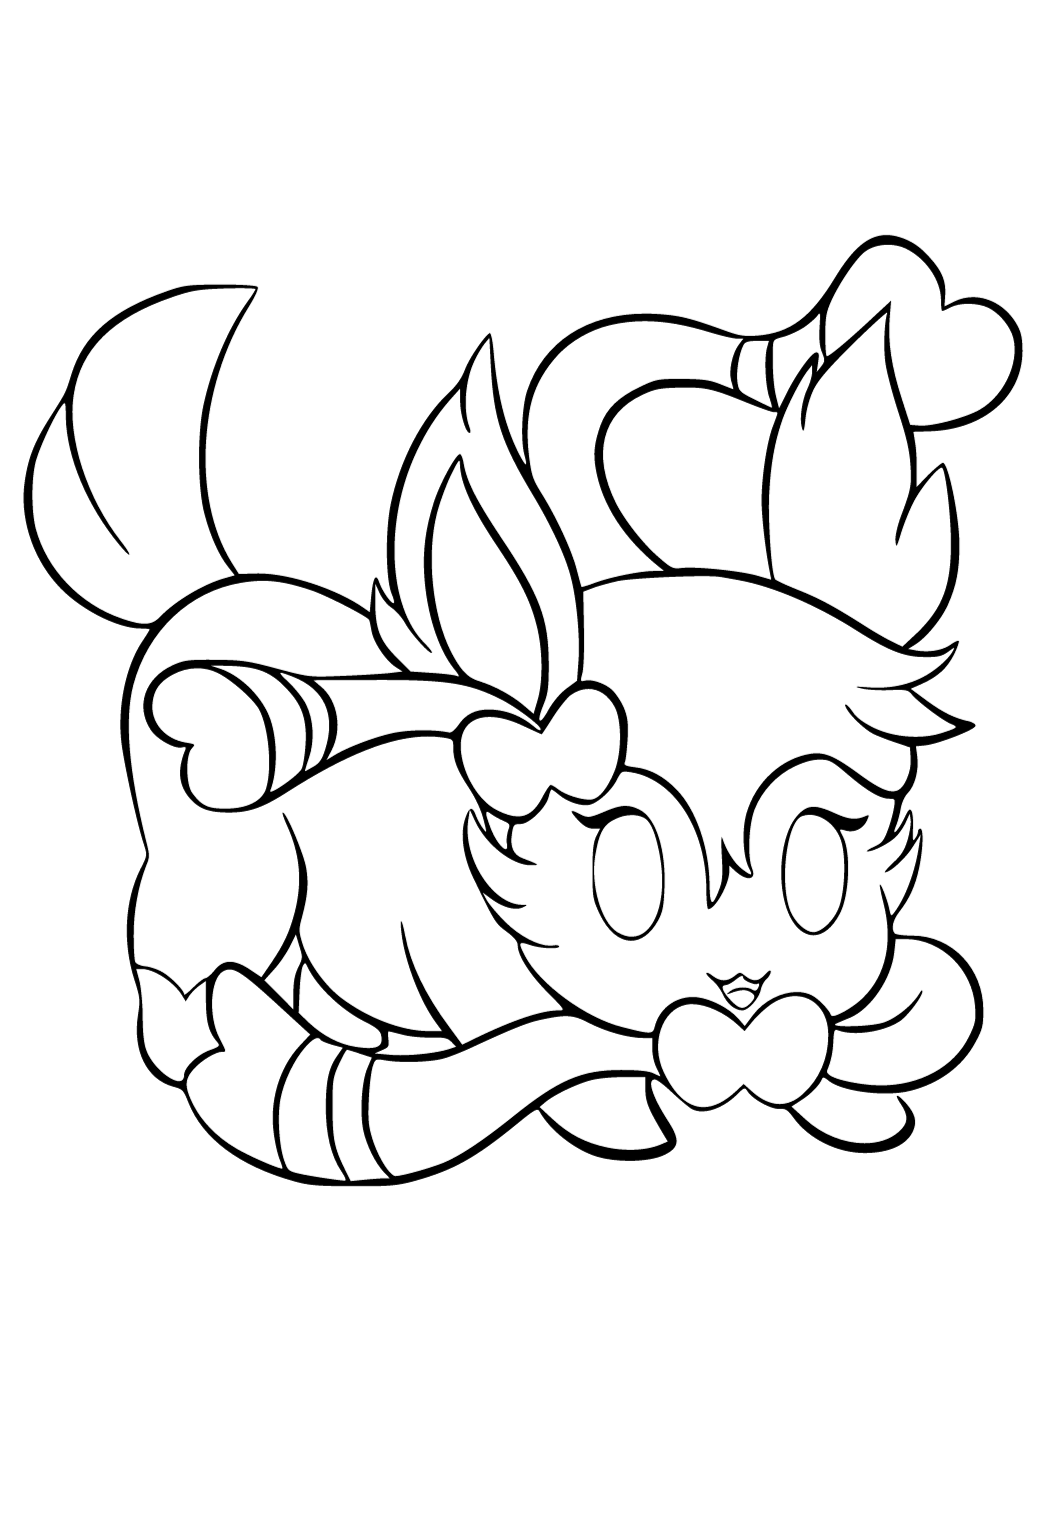 Free printable sylveon cute coloring page for adults and kids